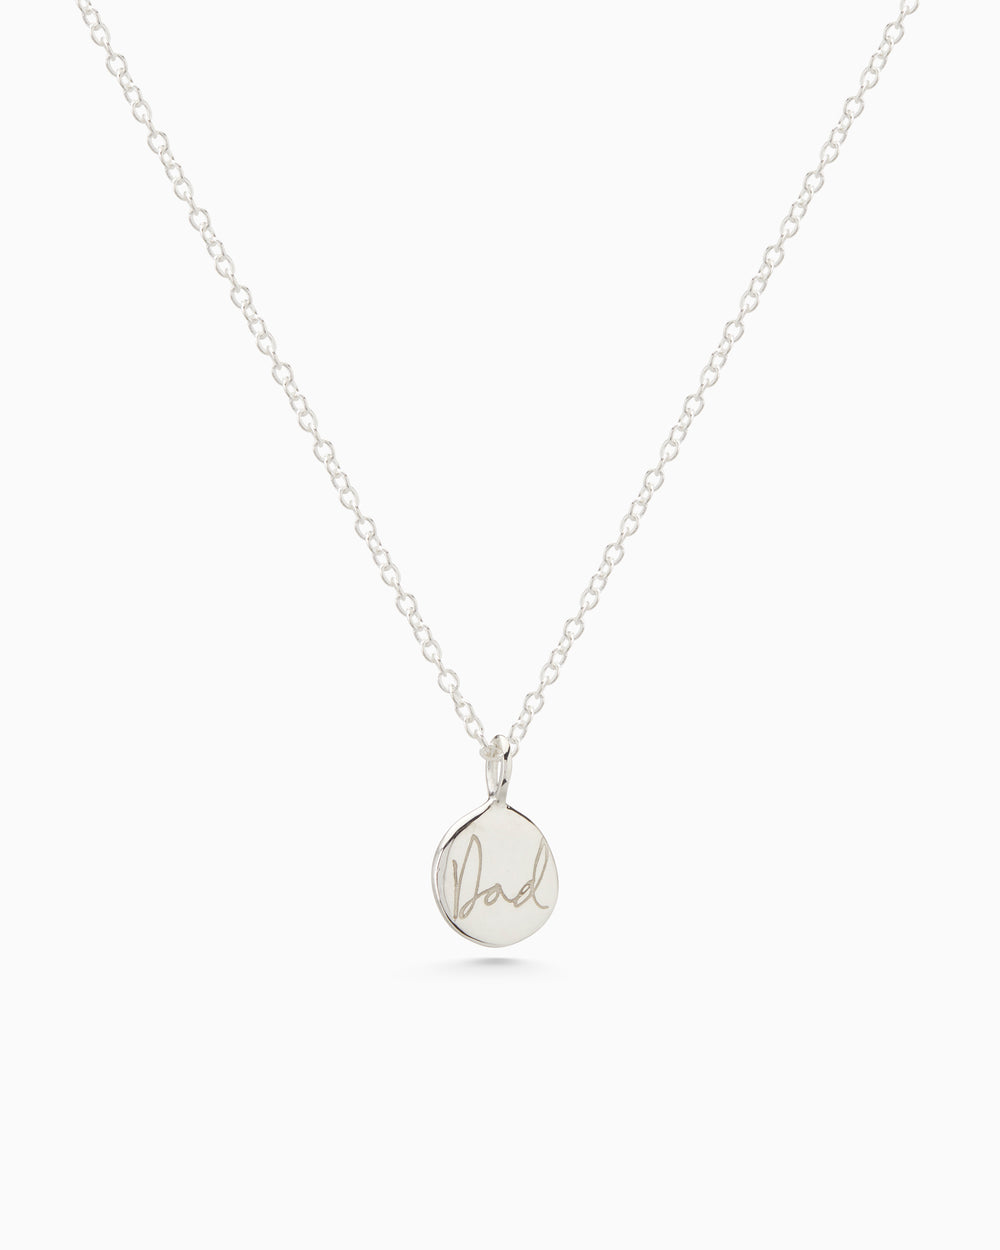 Custom Engraved Necklace | Solid White Gold